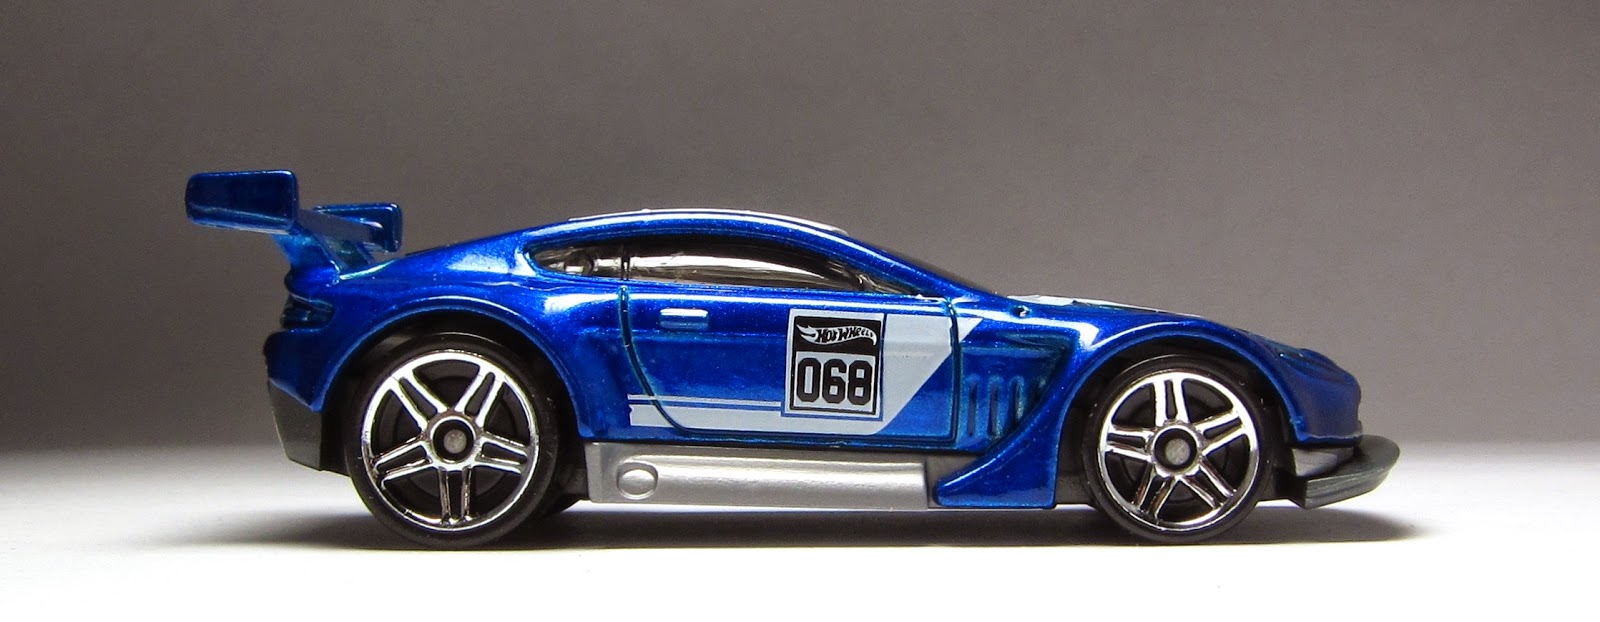 First Look: The highlights of Hot Wheels Batch K. 